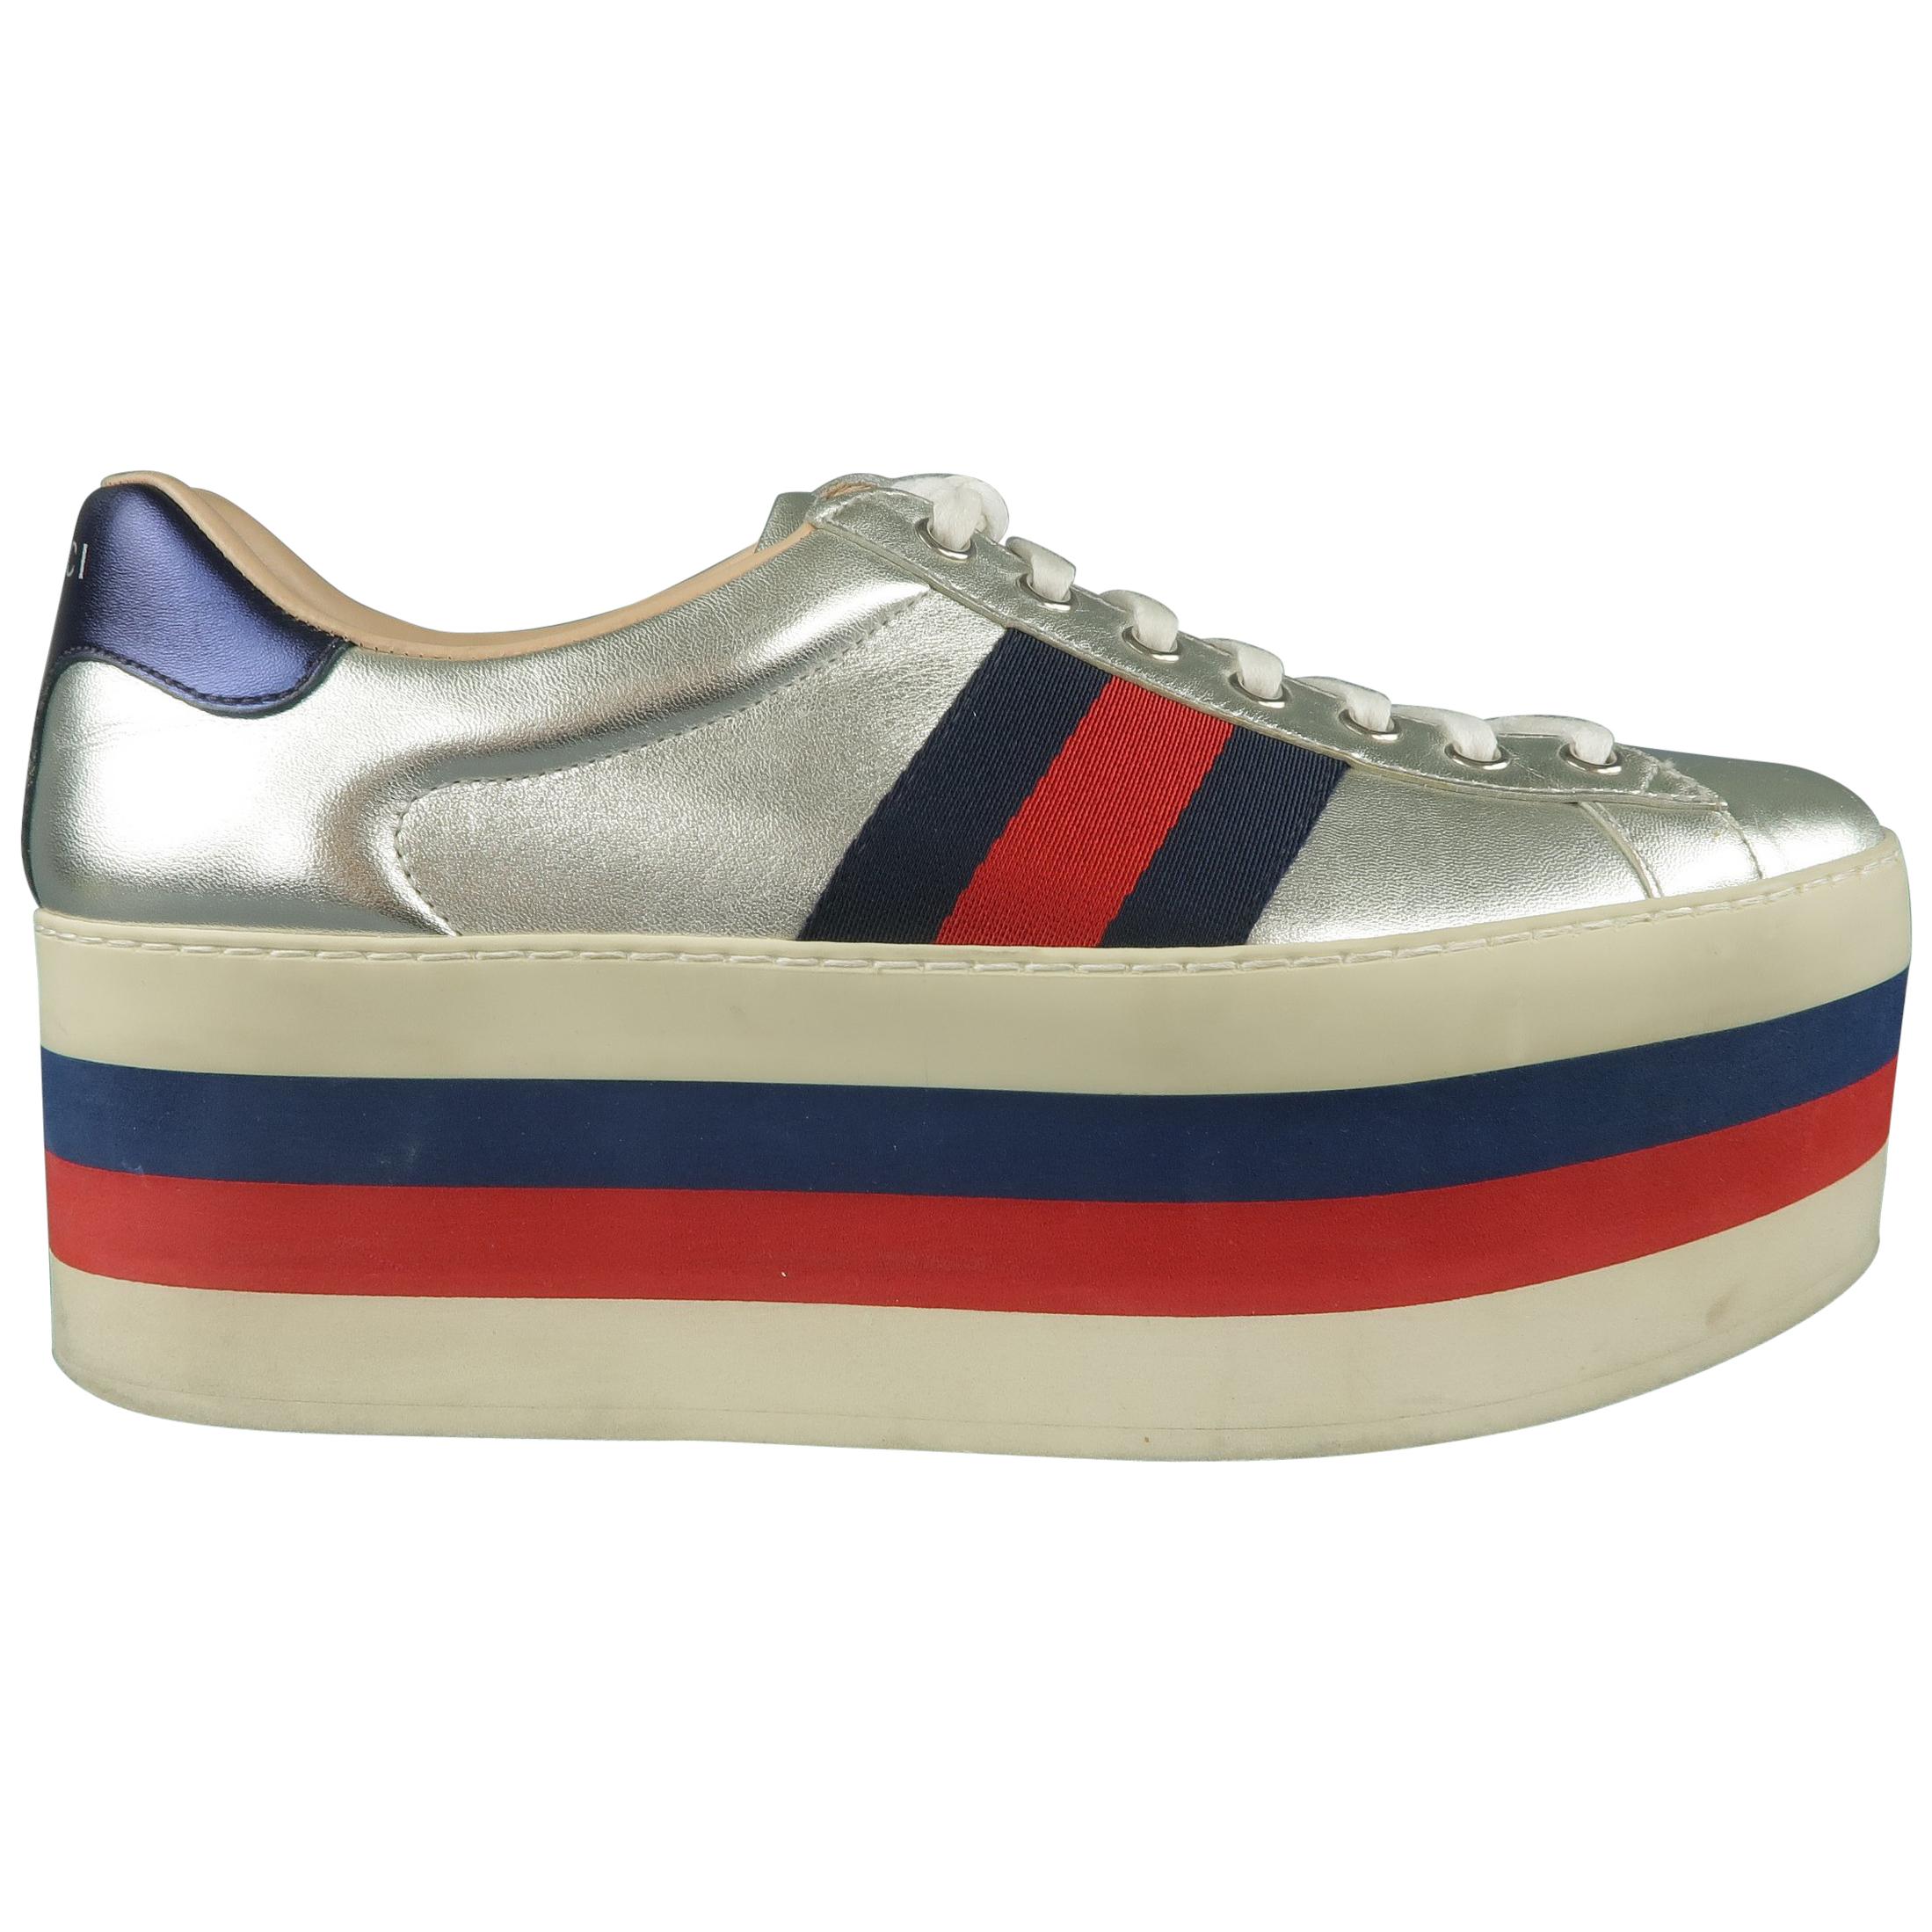 GUCCI Size 8 Silver Metallic Leather Striped Platform Sneakers Shoes